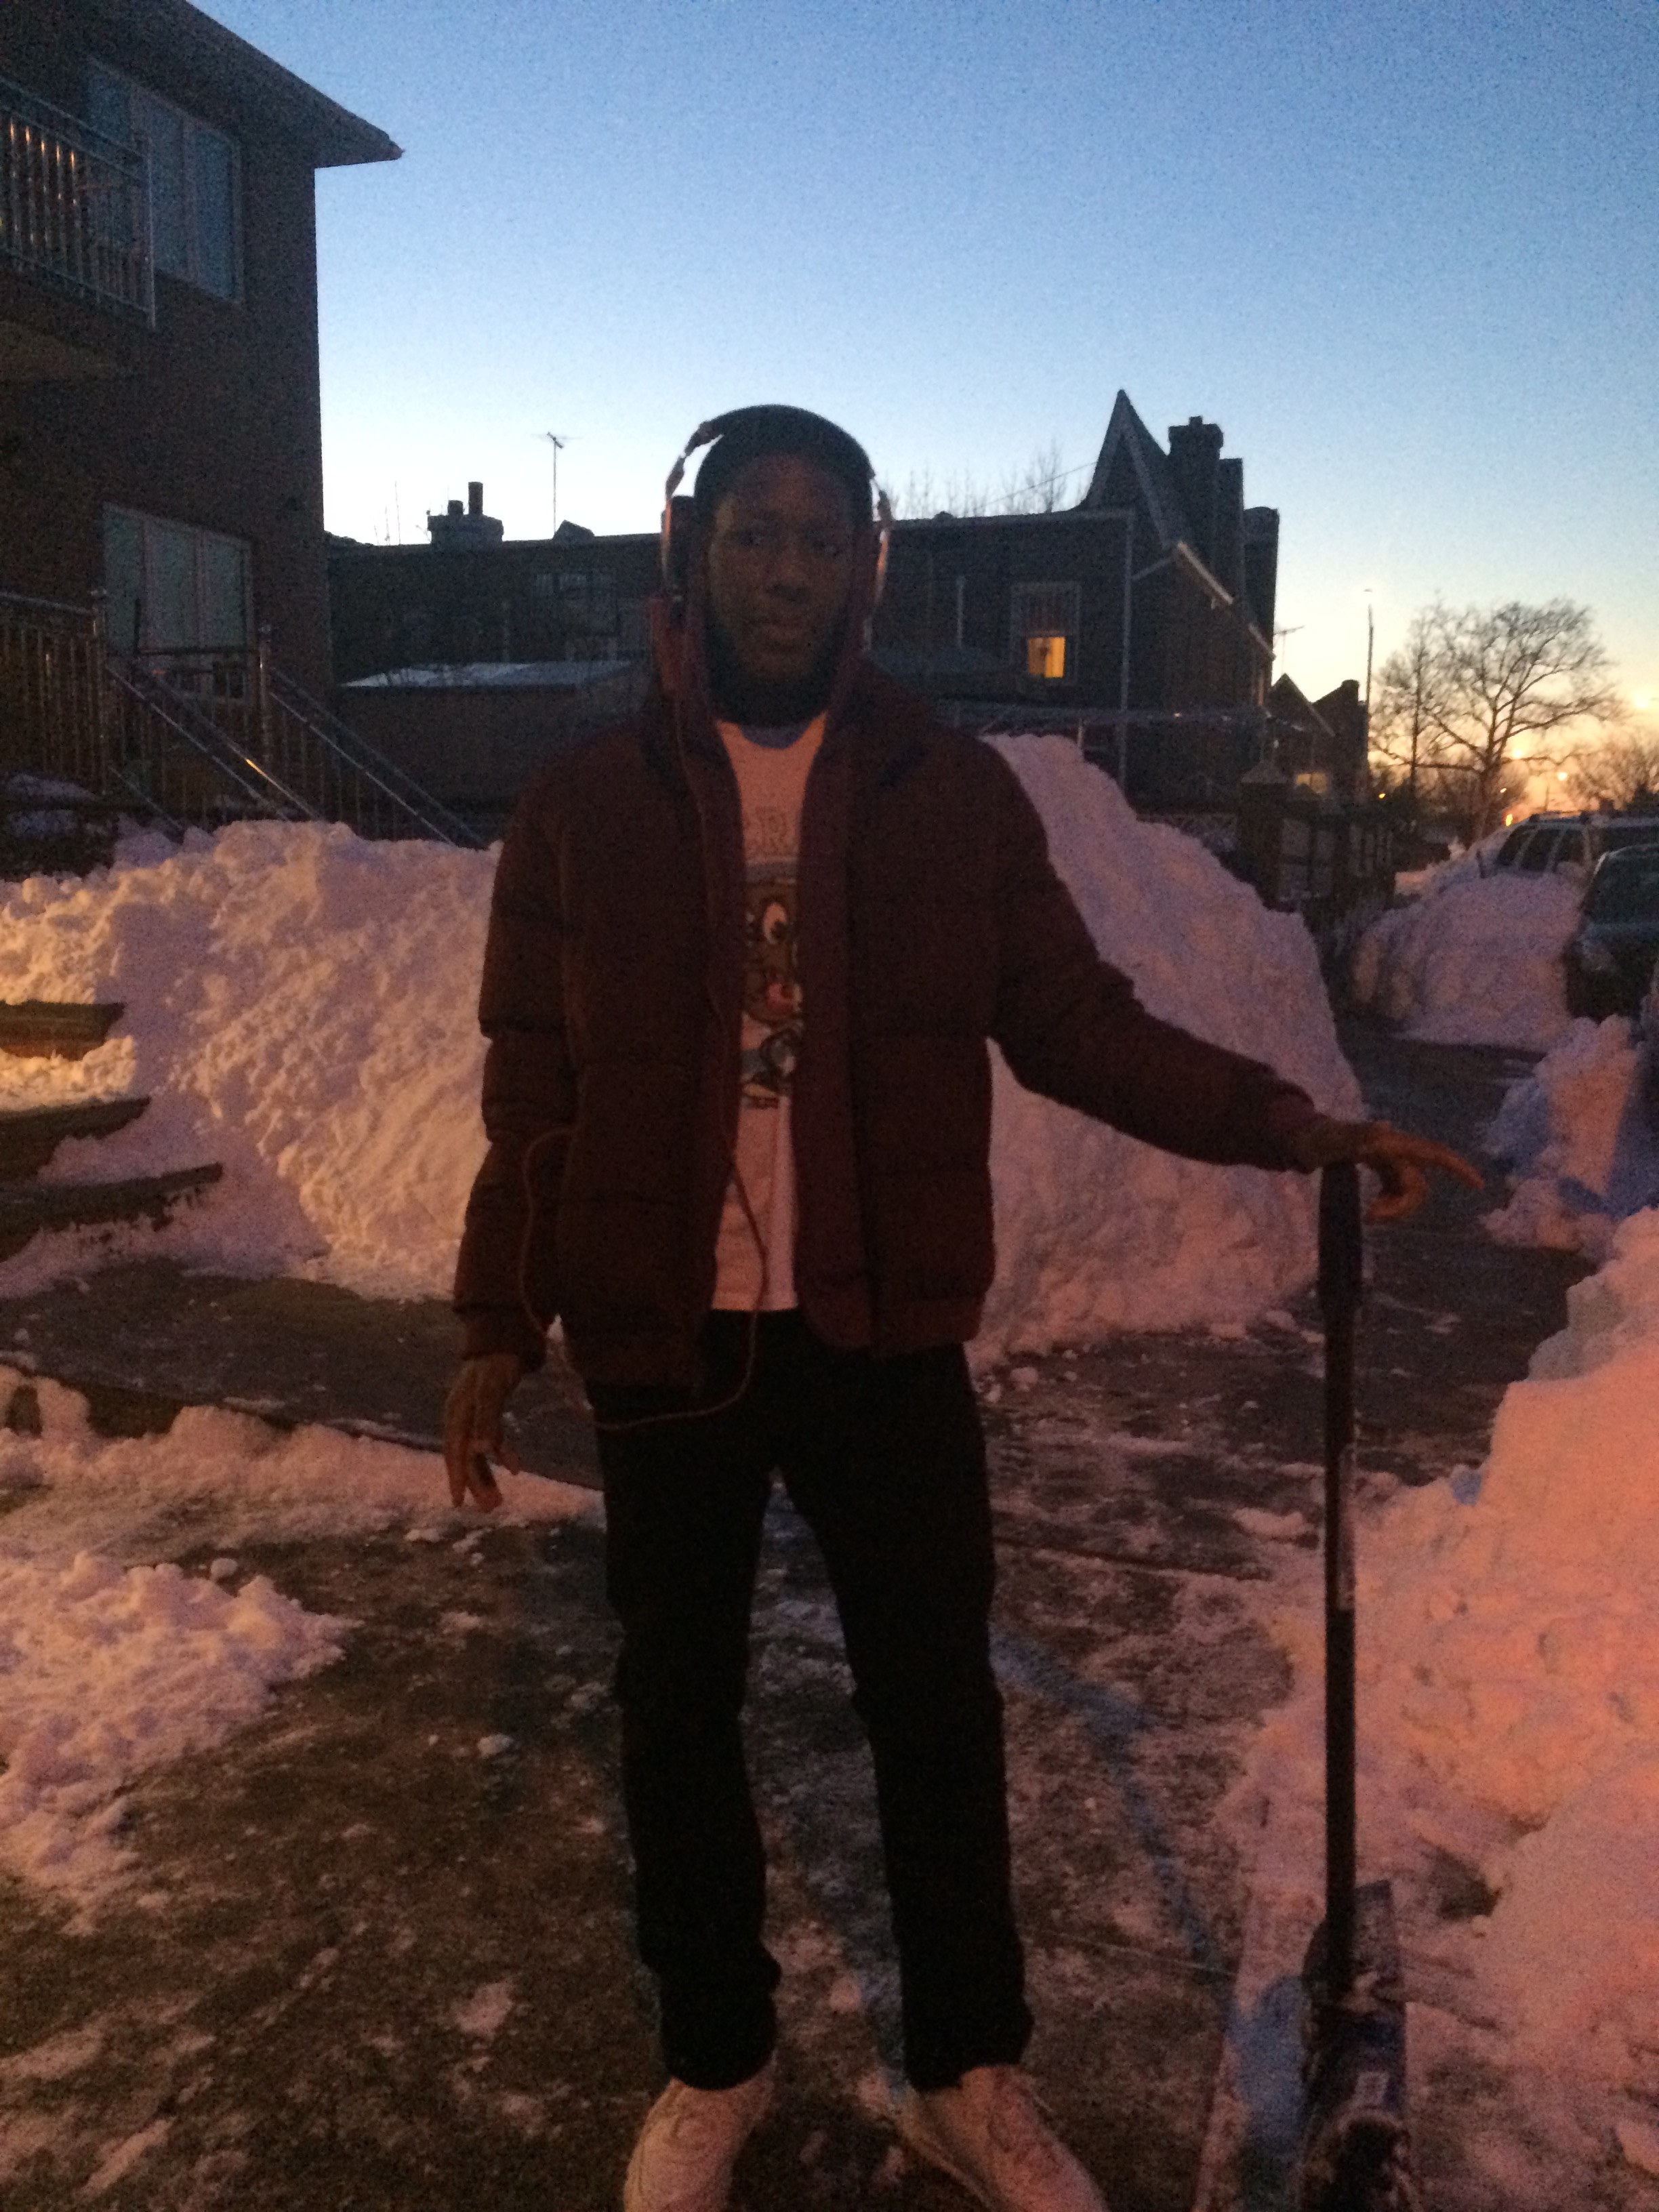 Omar Lawson taking a break after helping a UPS truck that got stuck in the snow.